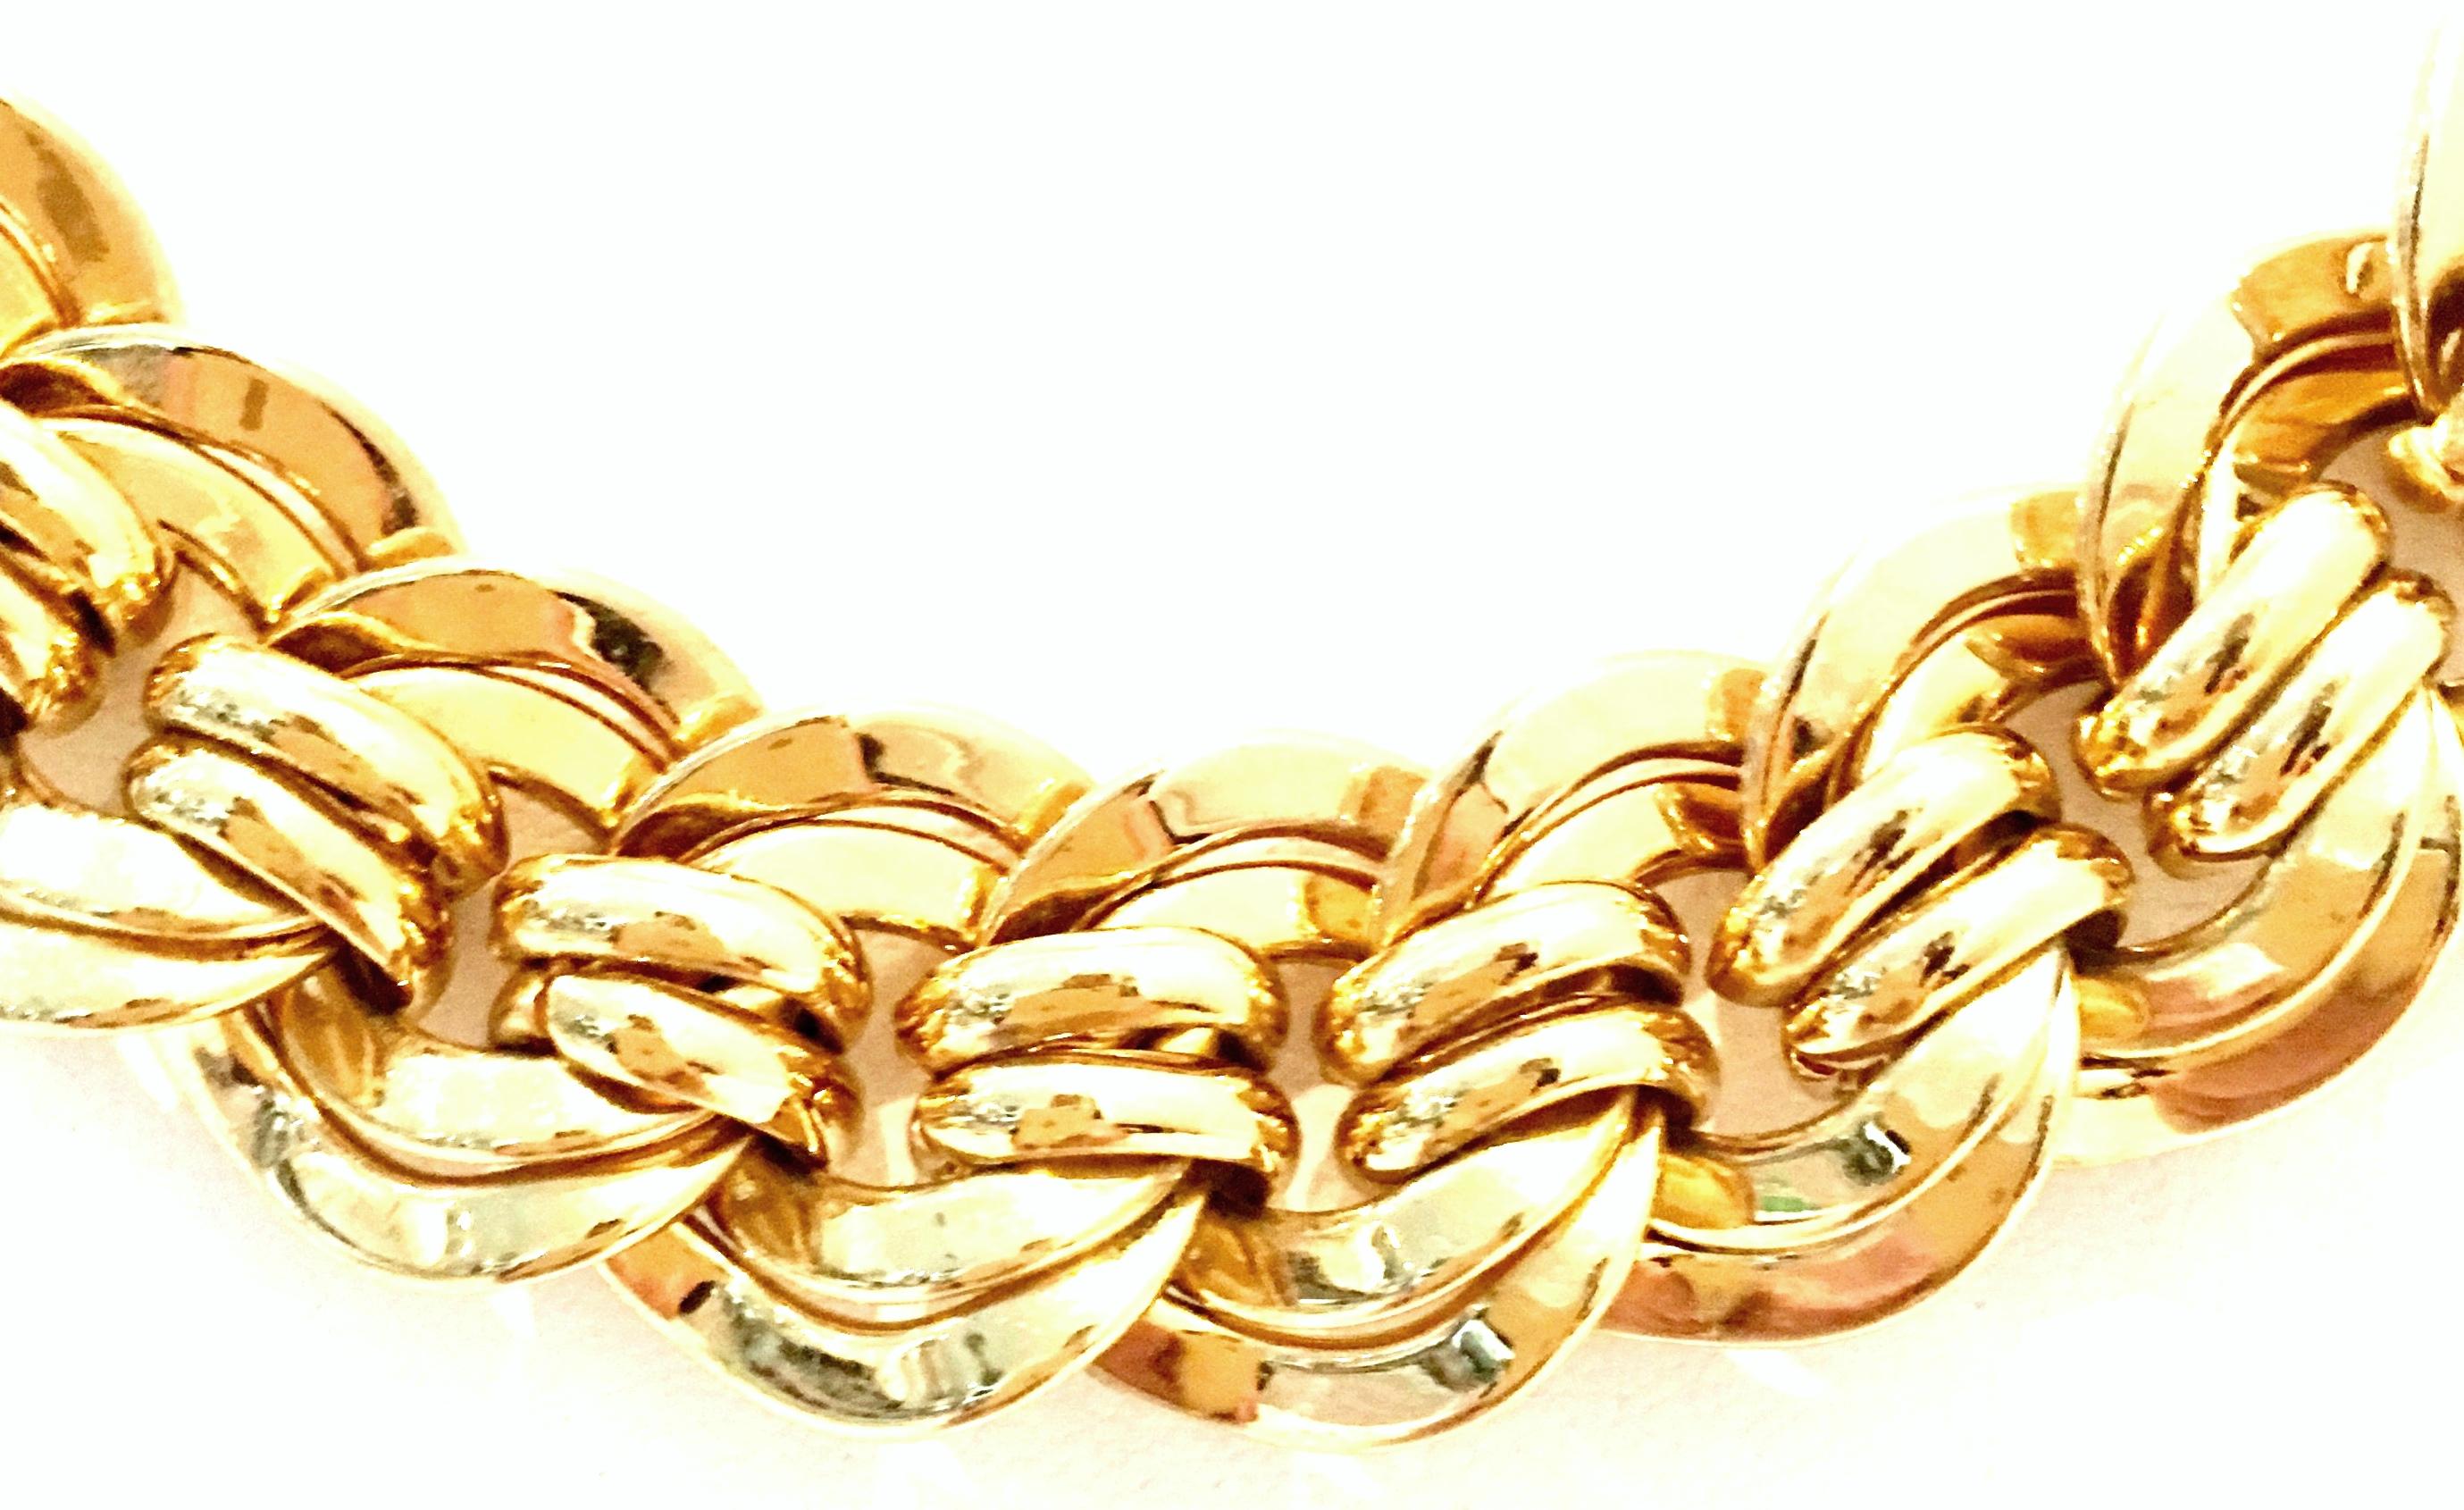 20th Century Italian Gold Plate Chain Link Choker  Style Necklace By, Napier 1